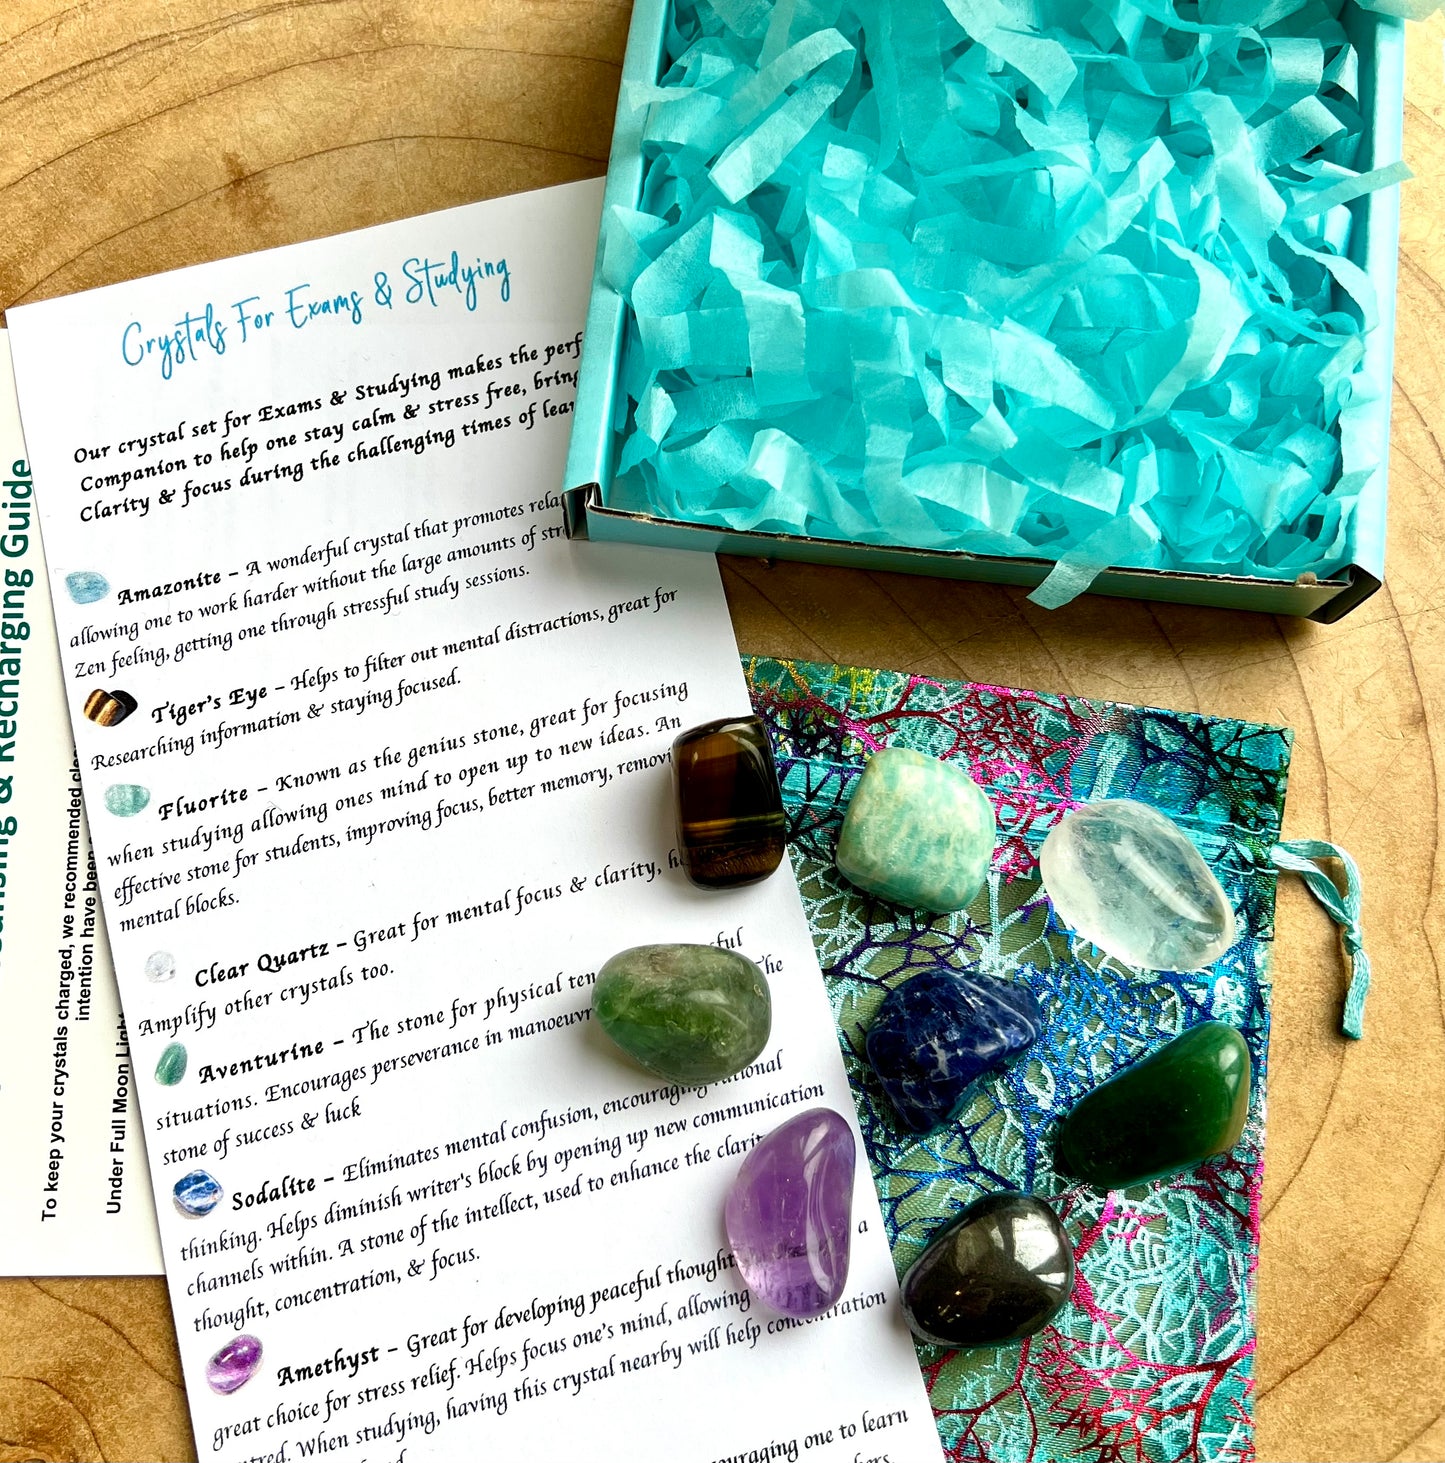 Crystals for Exams & Studying Gift Set